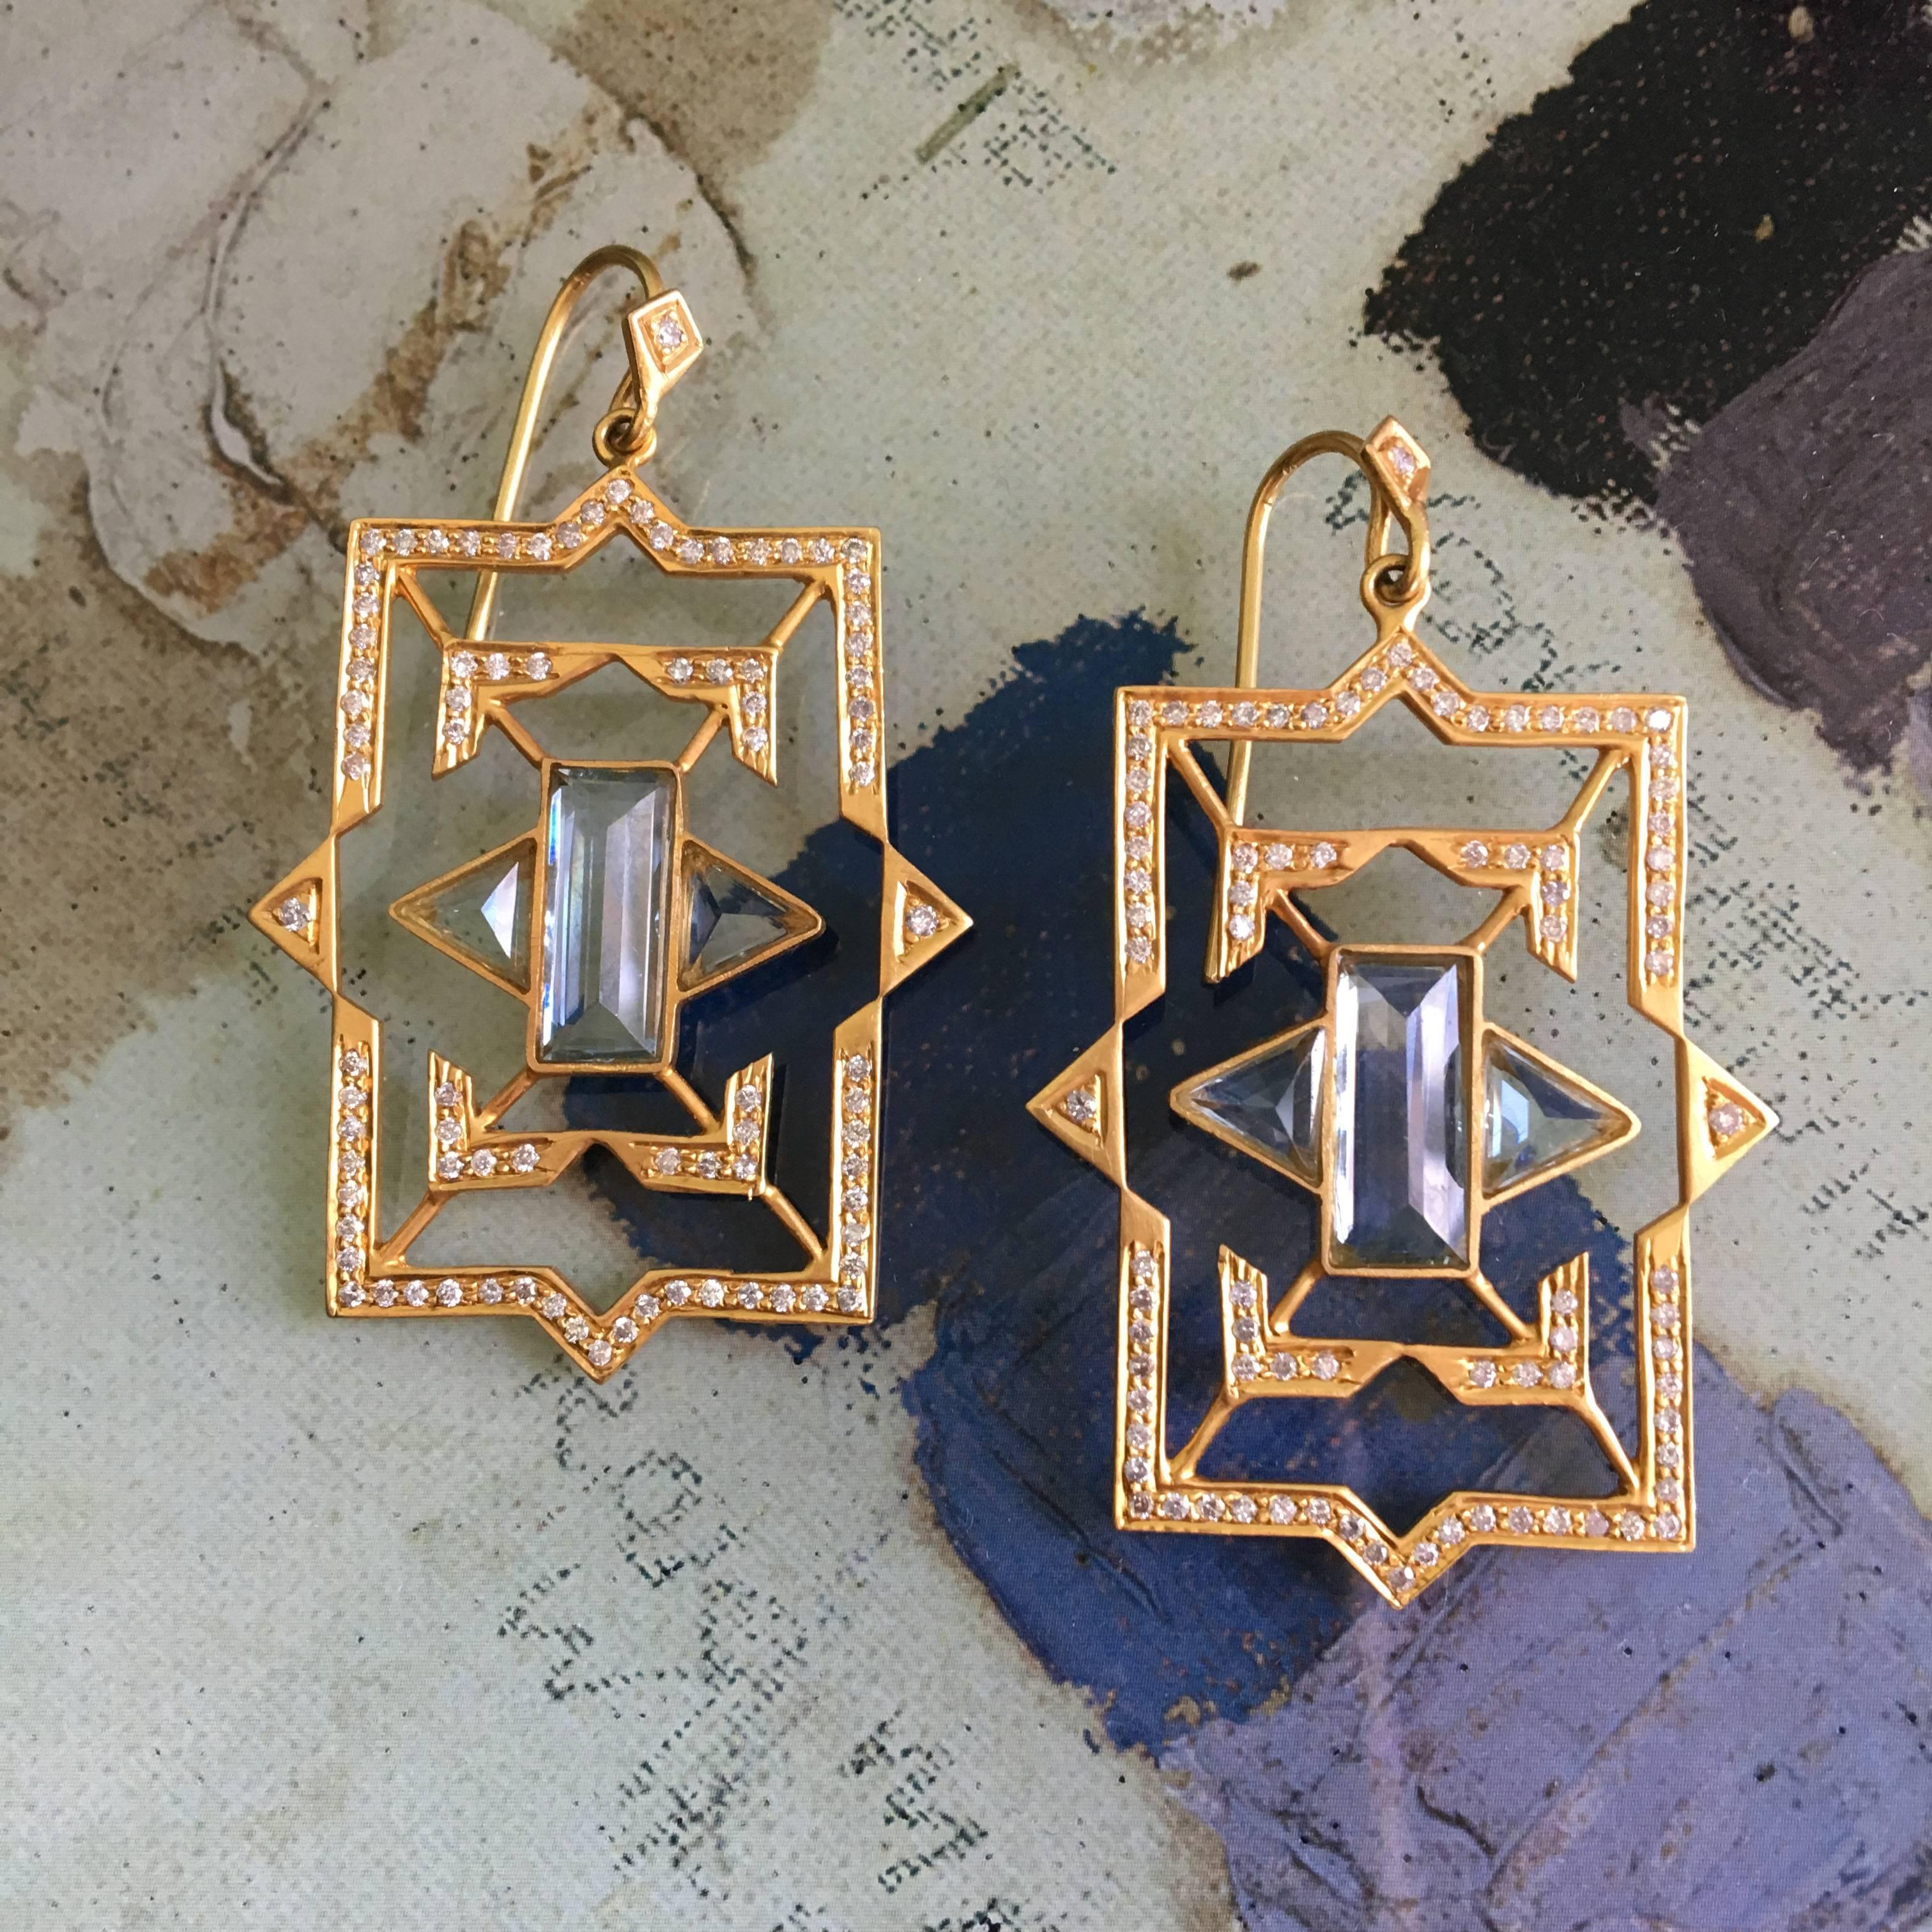 These architecturally inspired 18kt Yellow Gold, Diamond and Aquamarine earrings are lightweight and airy, yet make a fabulous statement.  Finished in Lauren Harper's signature matte gold finish, these geometric earrings are perfect for all day